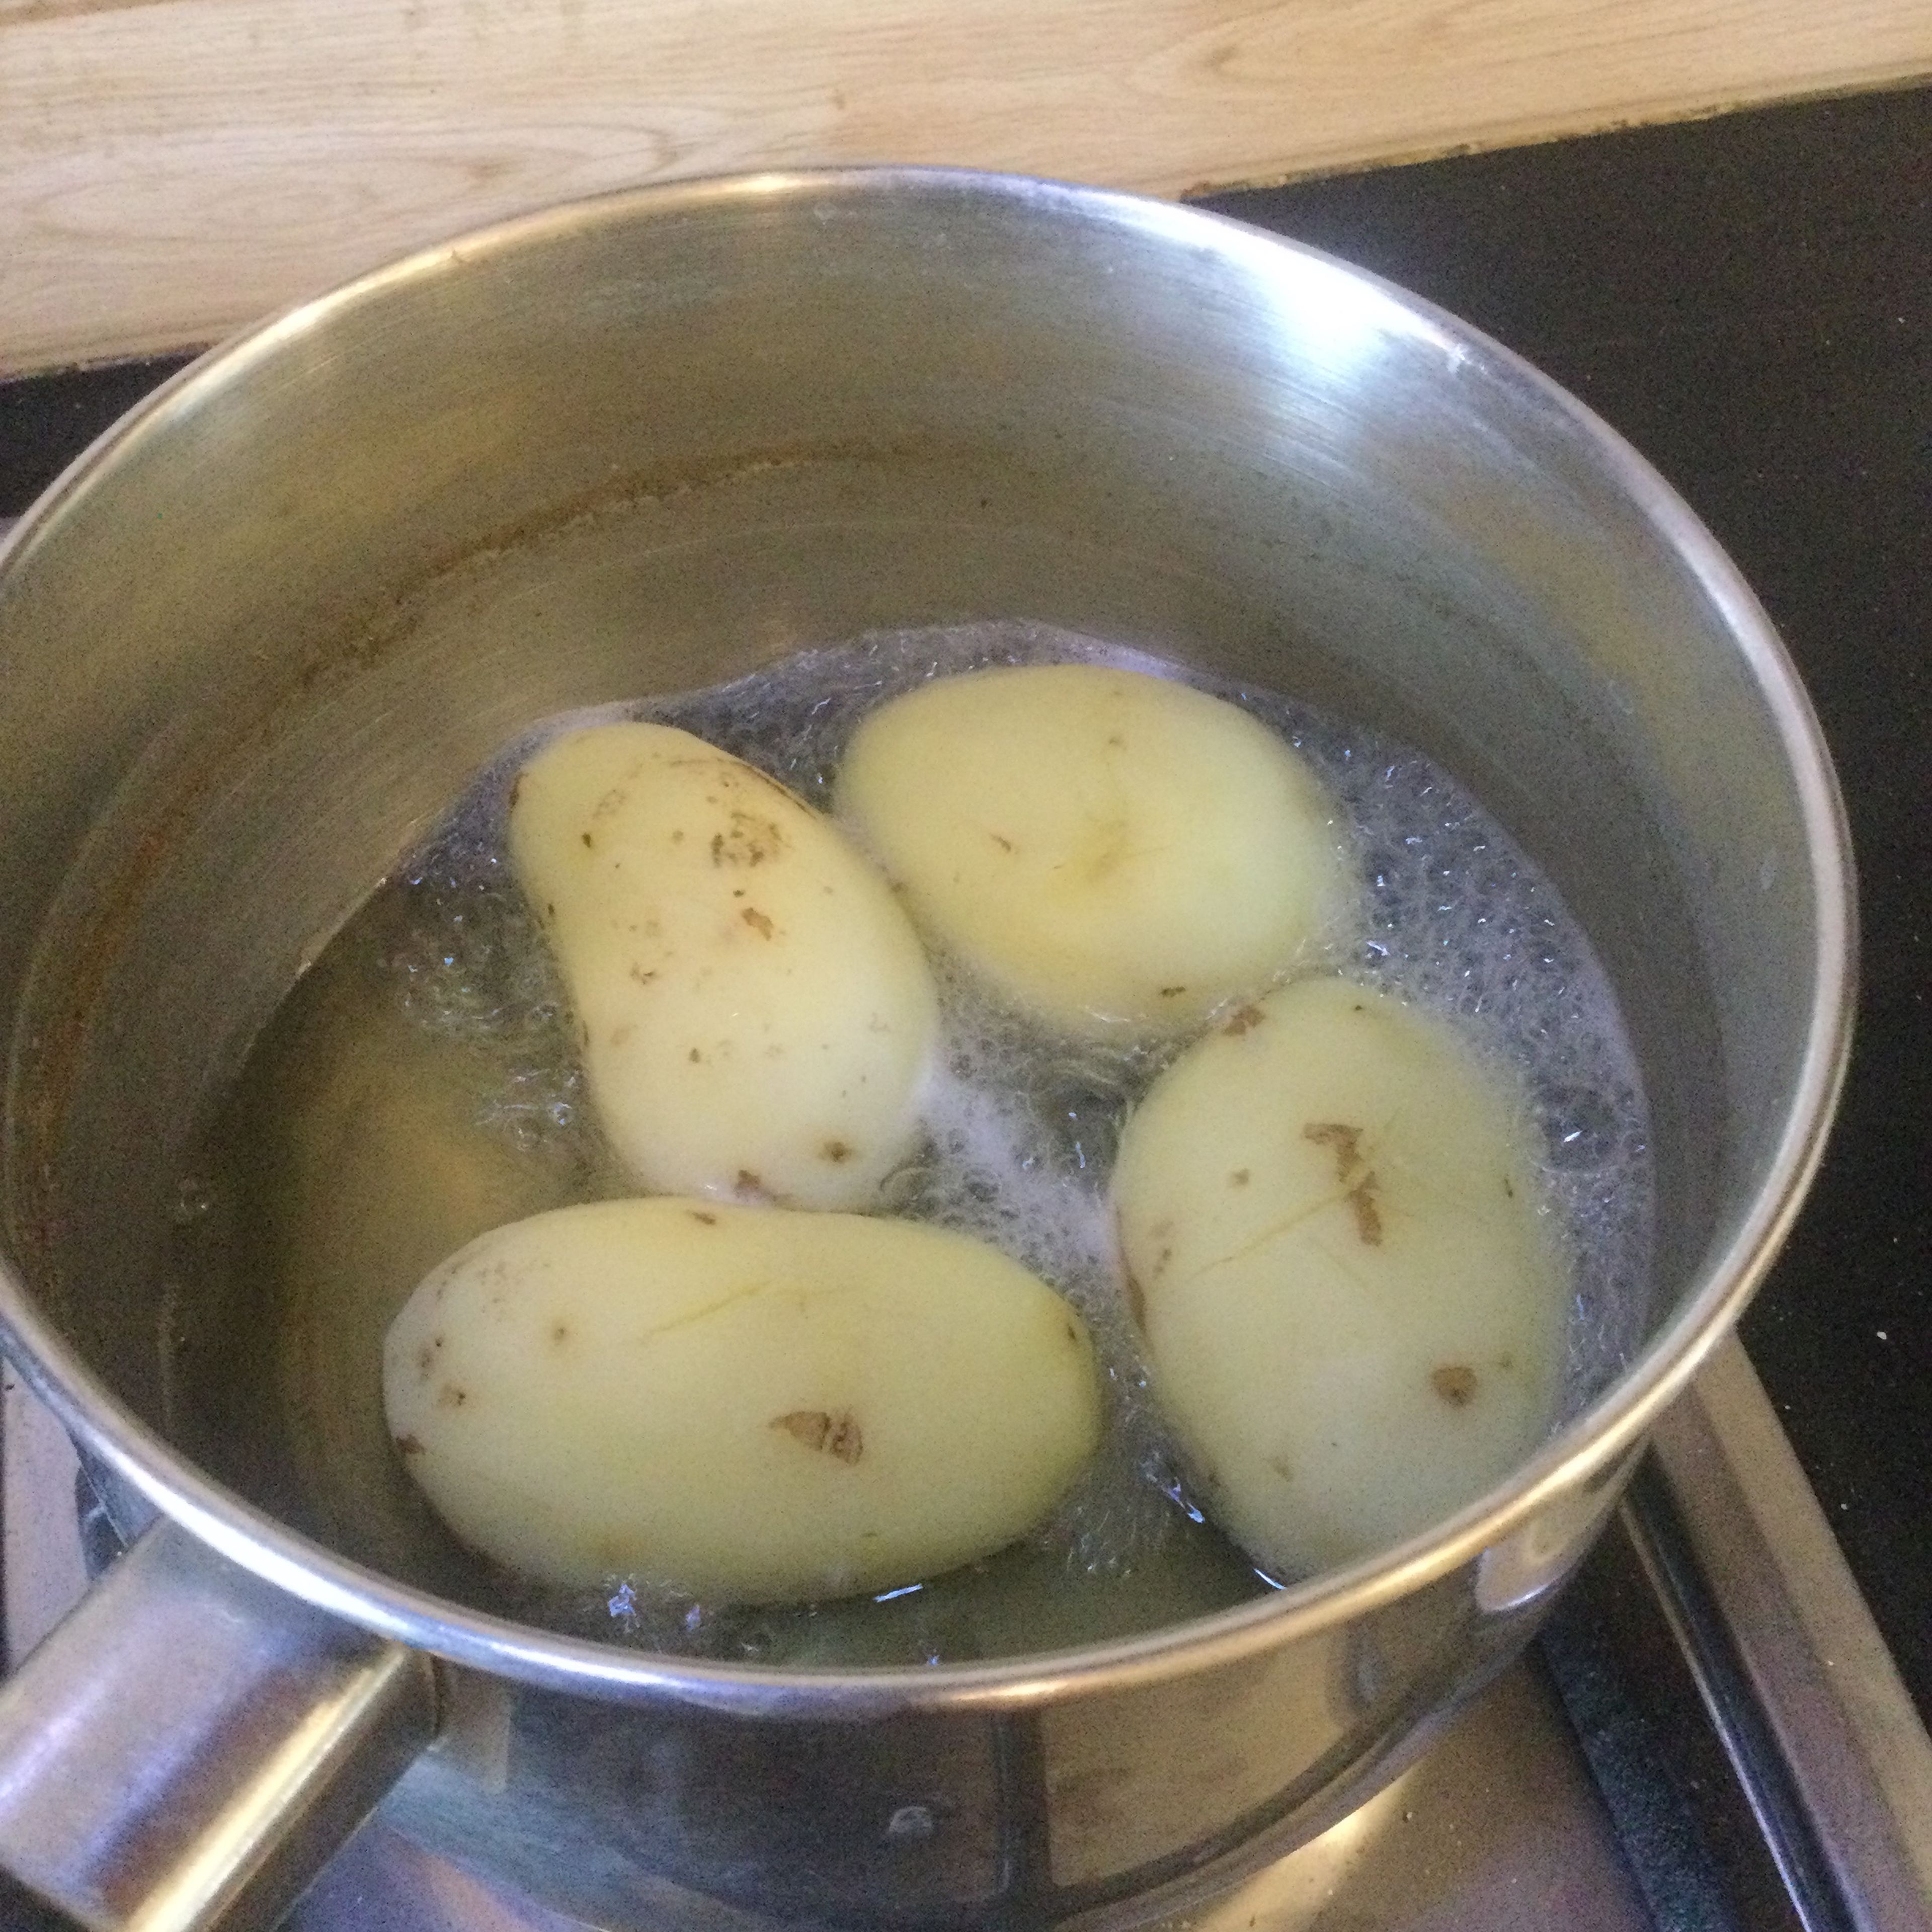 Peel and boil the potatoes in salted water